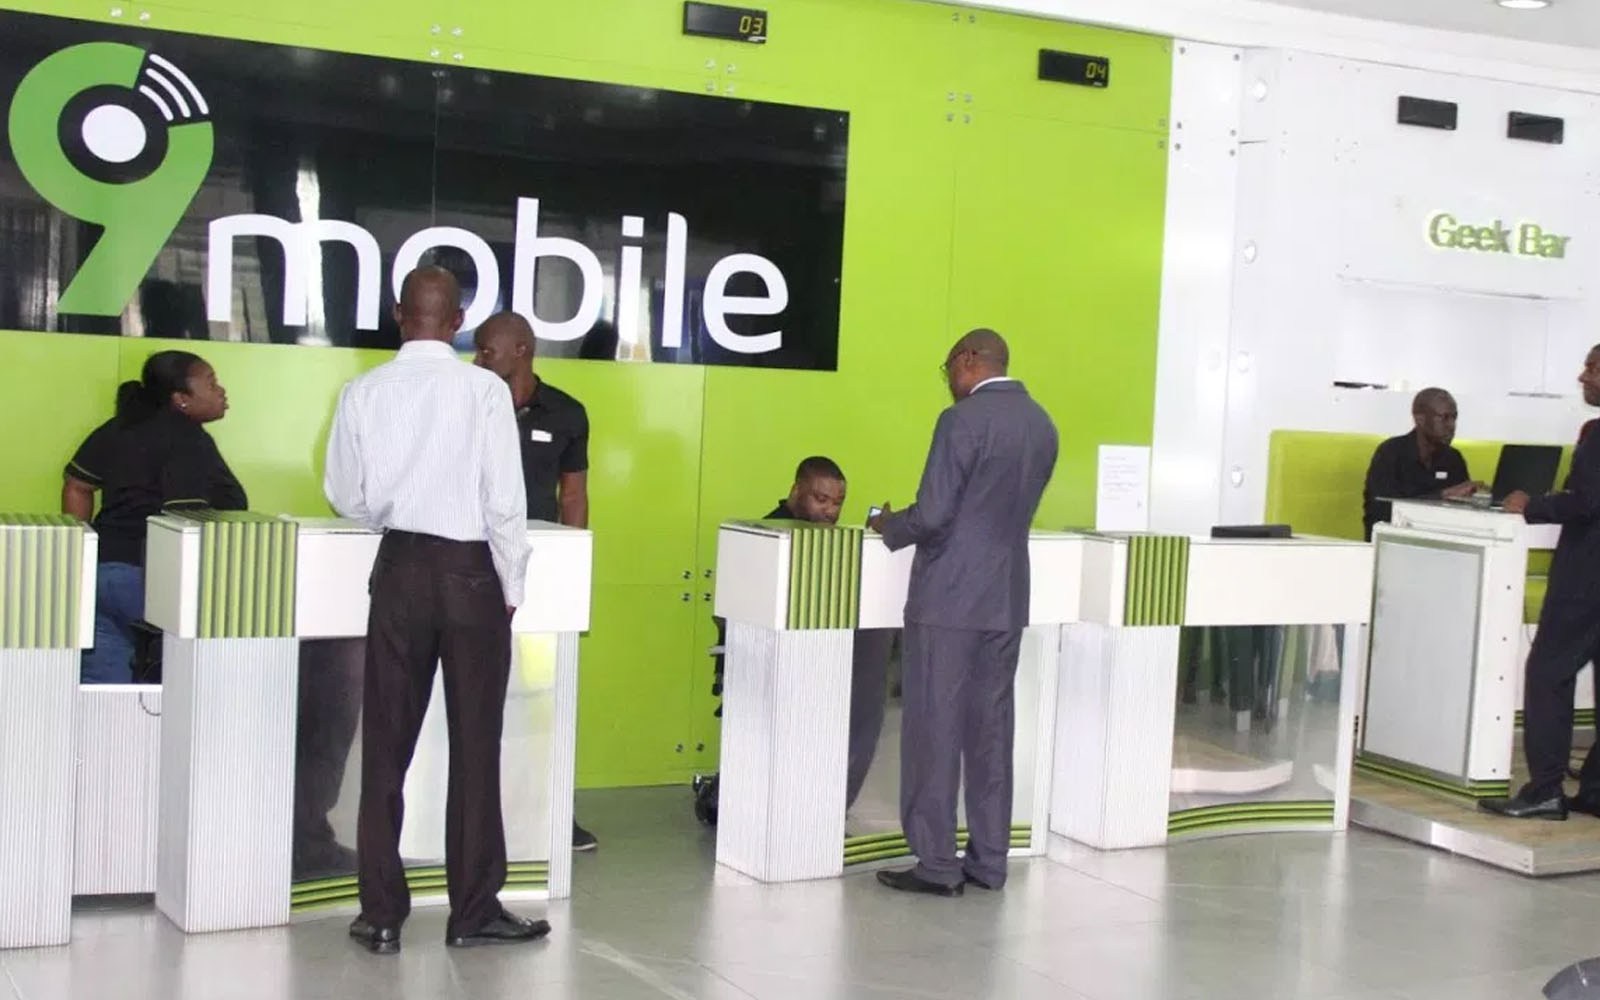 9mobile urges Nigerians to stay safe, connected through online, virtual channel